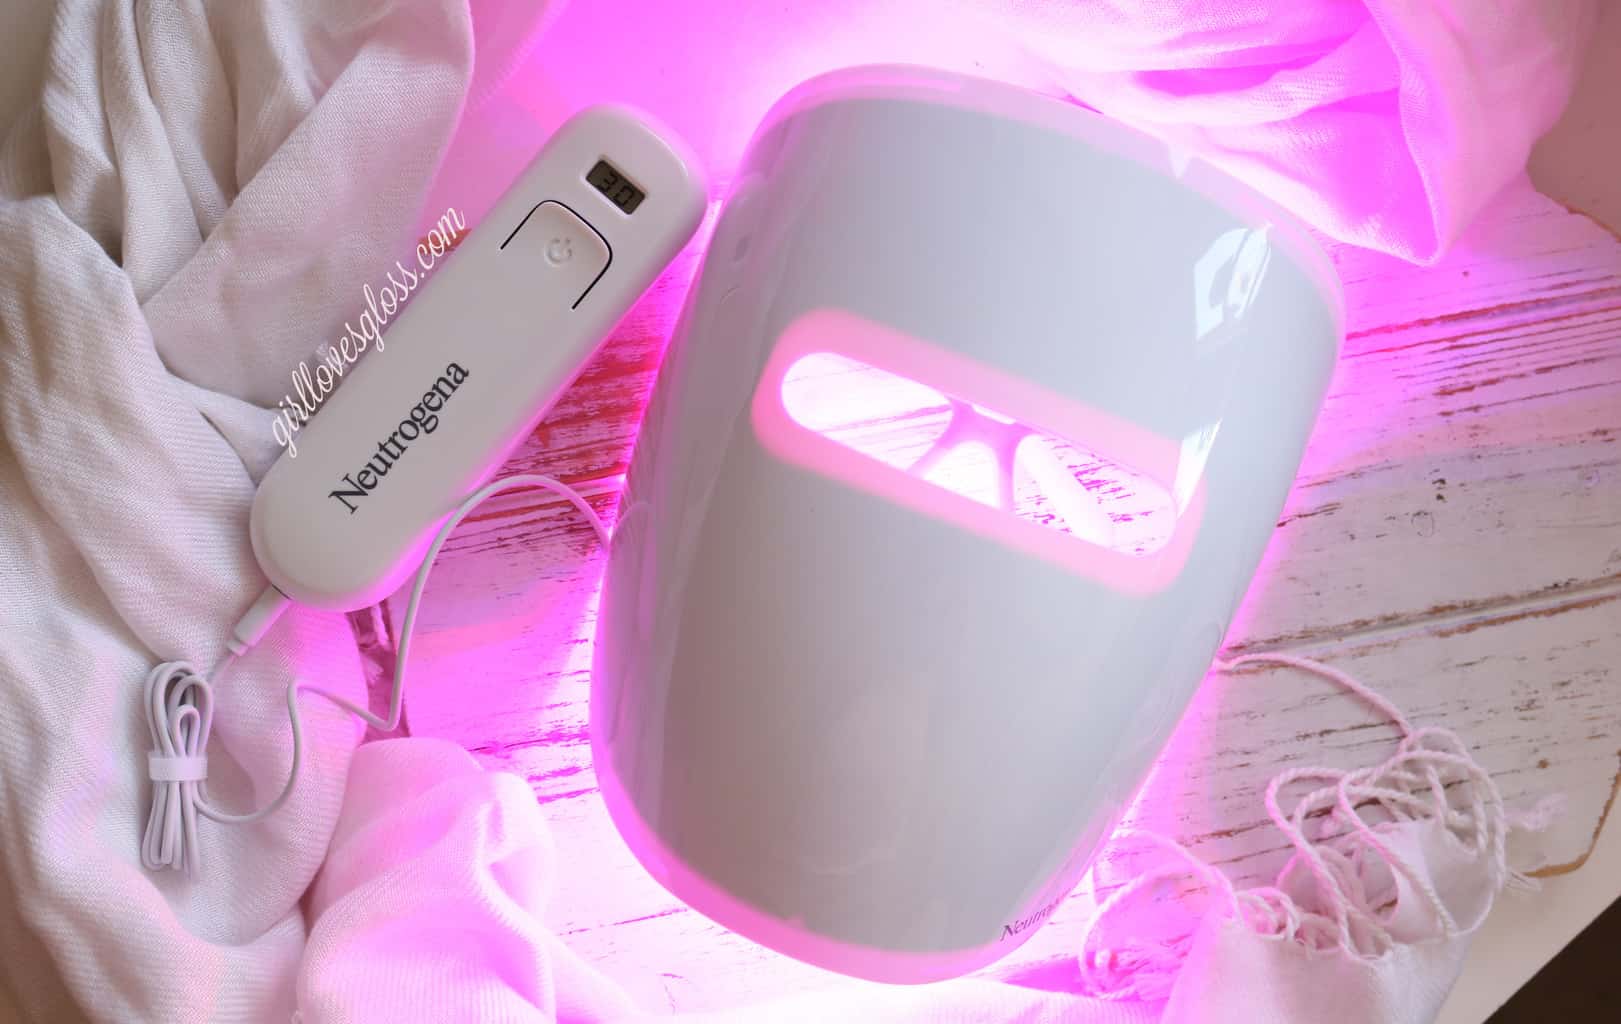 Kicking Breakouts to the Curb With Neutrogena’s Light Therapy Acne Mask